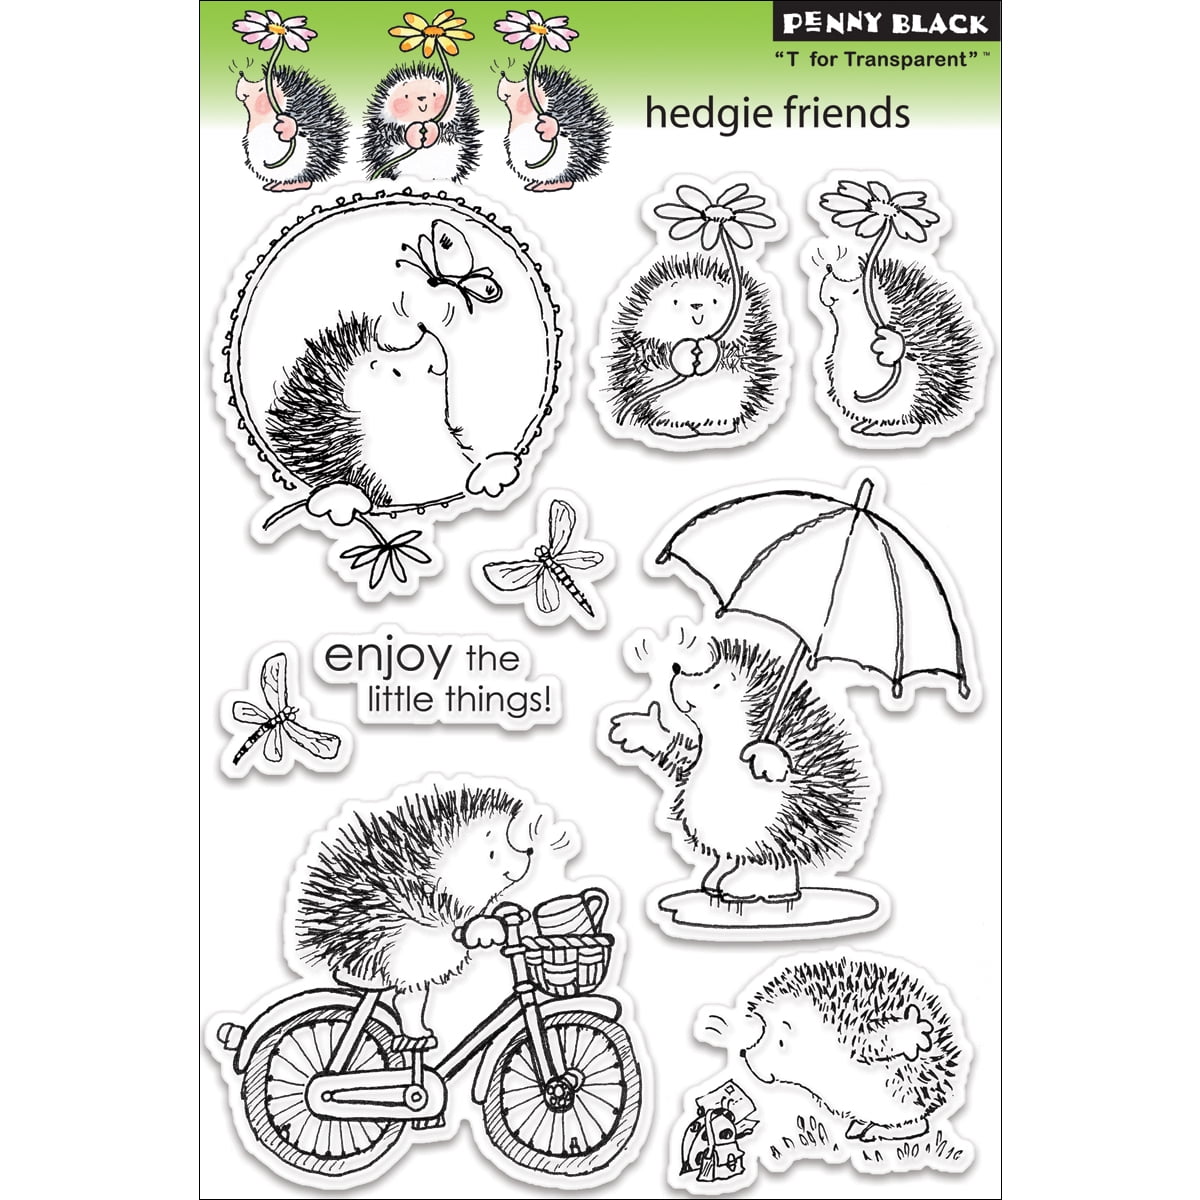 New Penny Black Betsy Bluebell Clear Stamps Girl Flowers Balloons Presents 